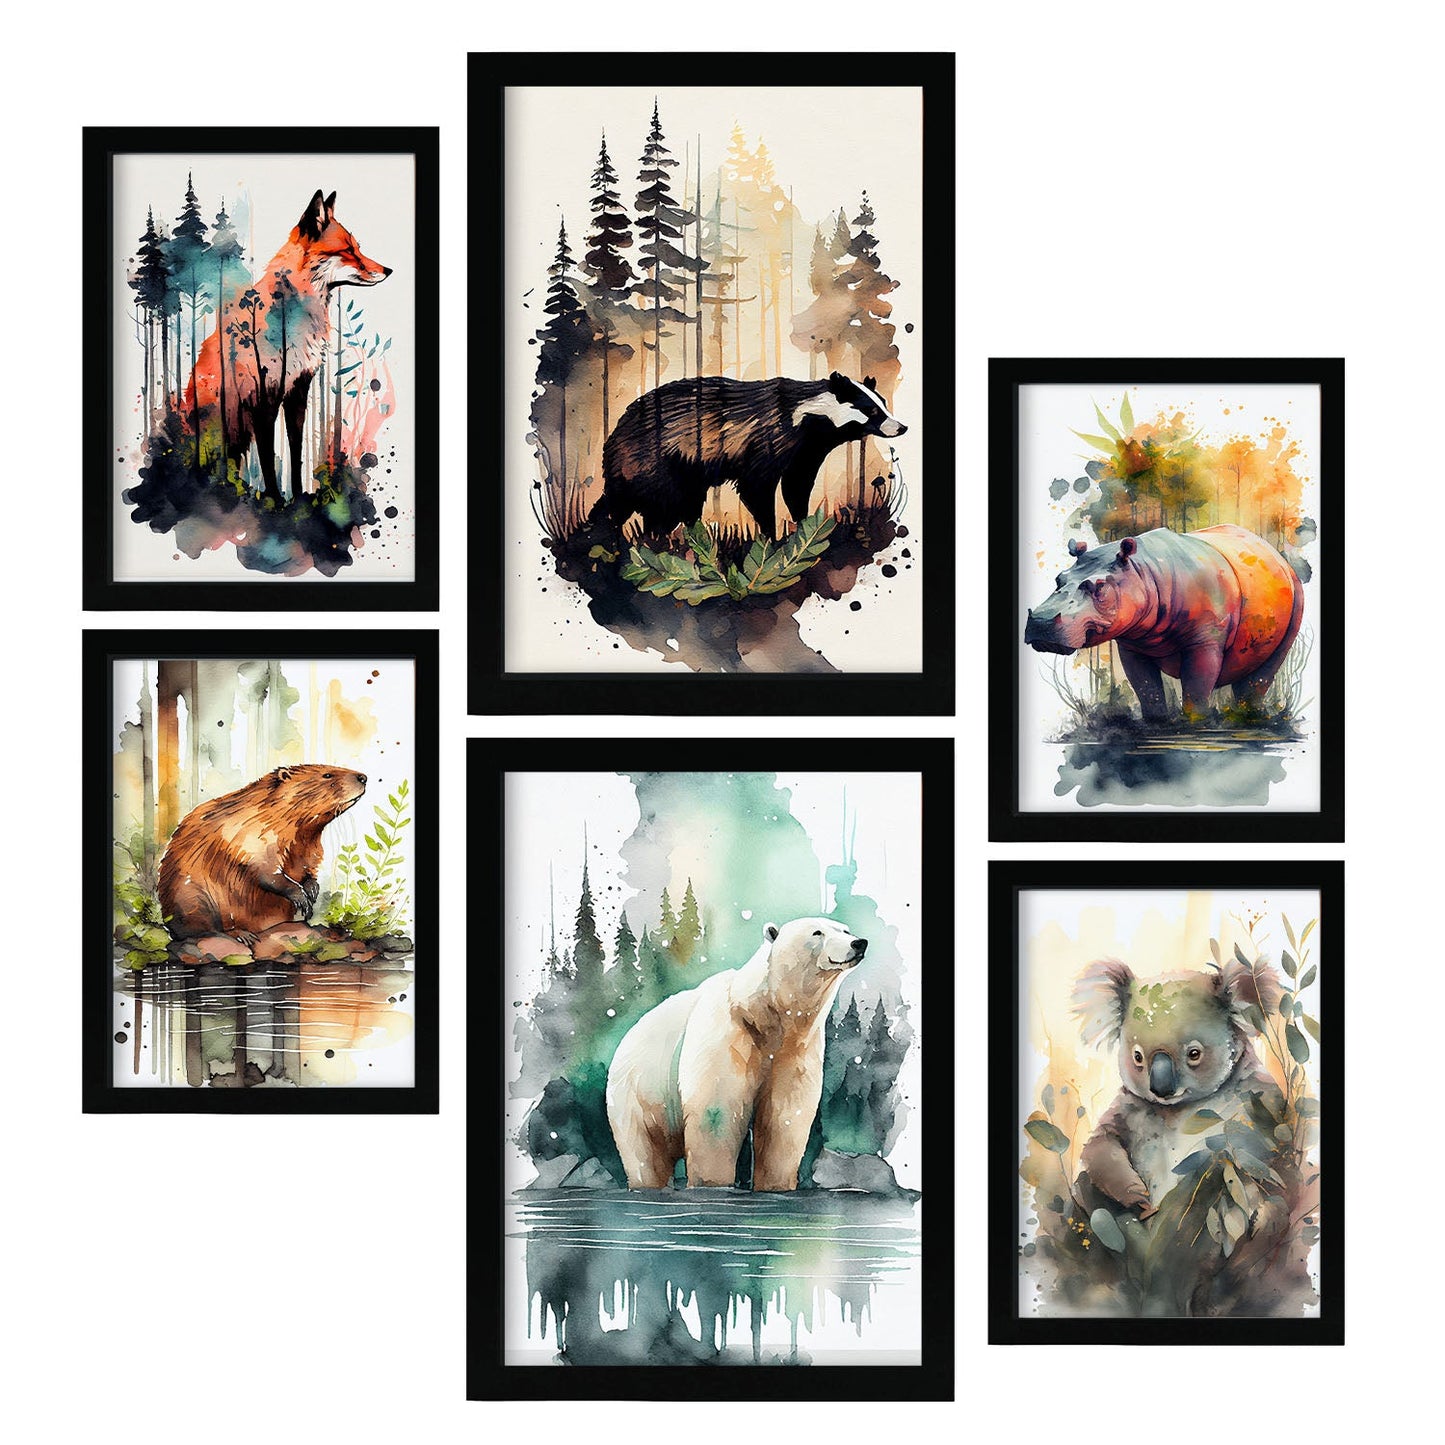 Nacnic Watercolor Animal Set_4. Aesthetic Wall Art Prints for Bedroom or Living Room Design.